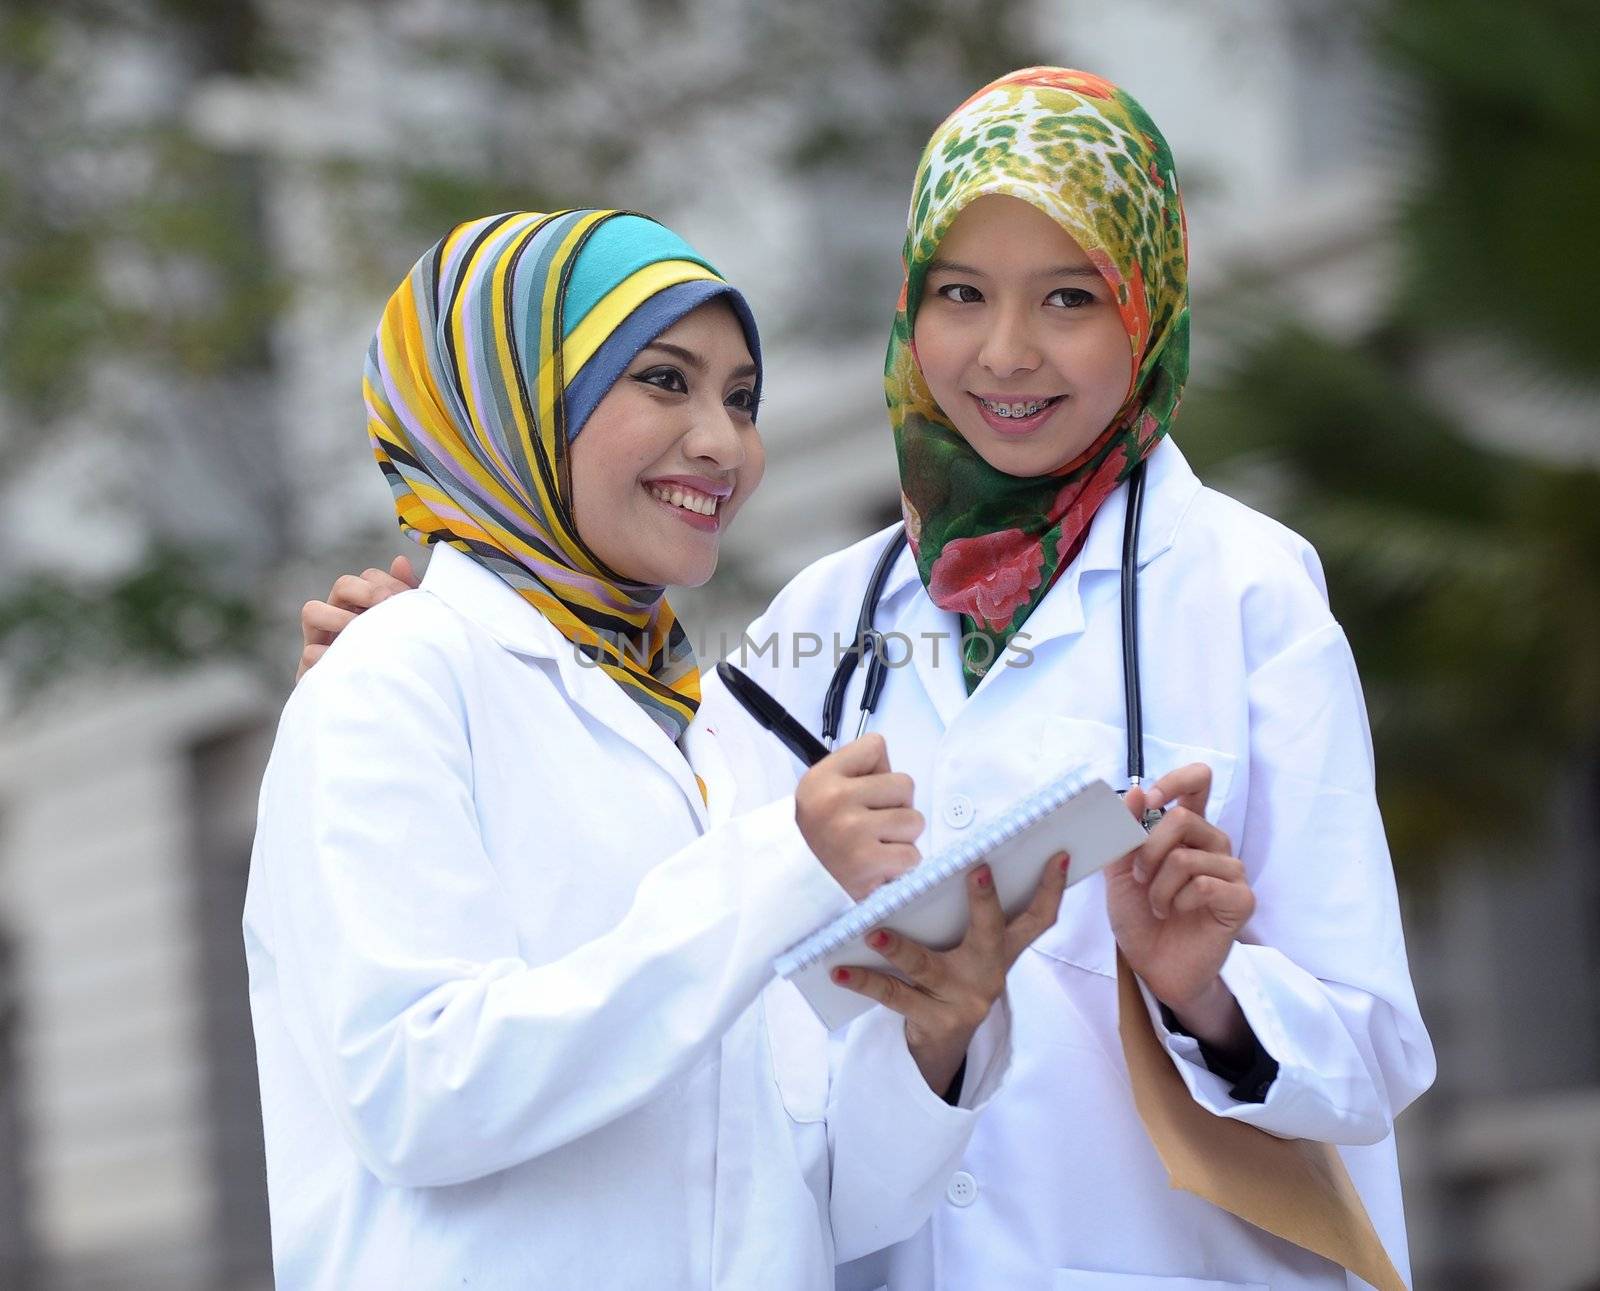 Two Women Doctor With Scarf, Outdoor by jaggat